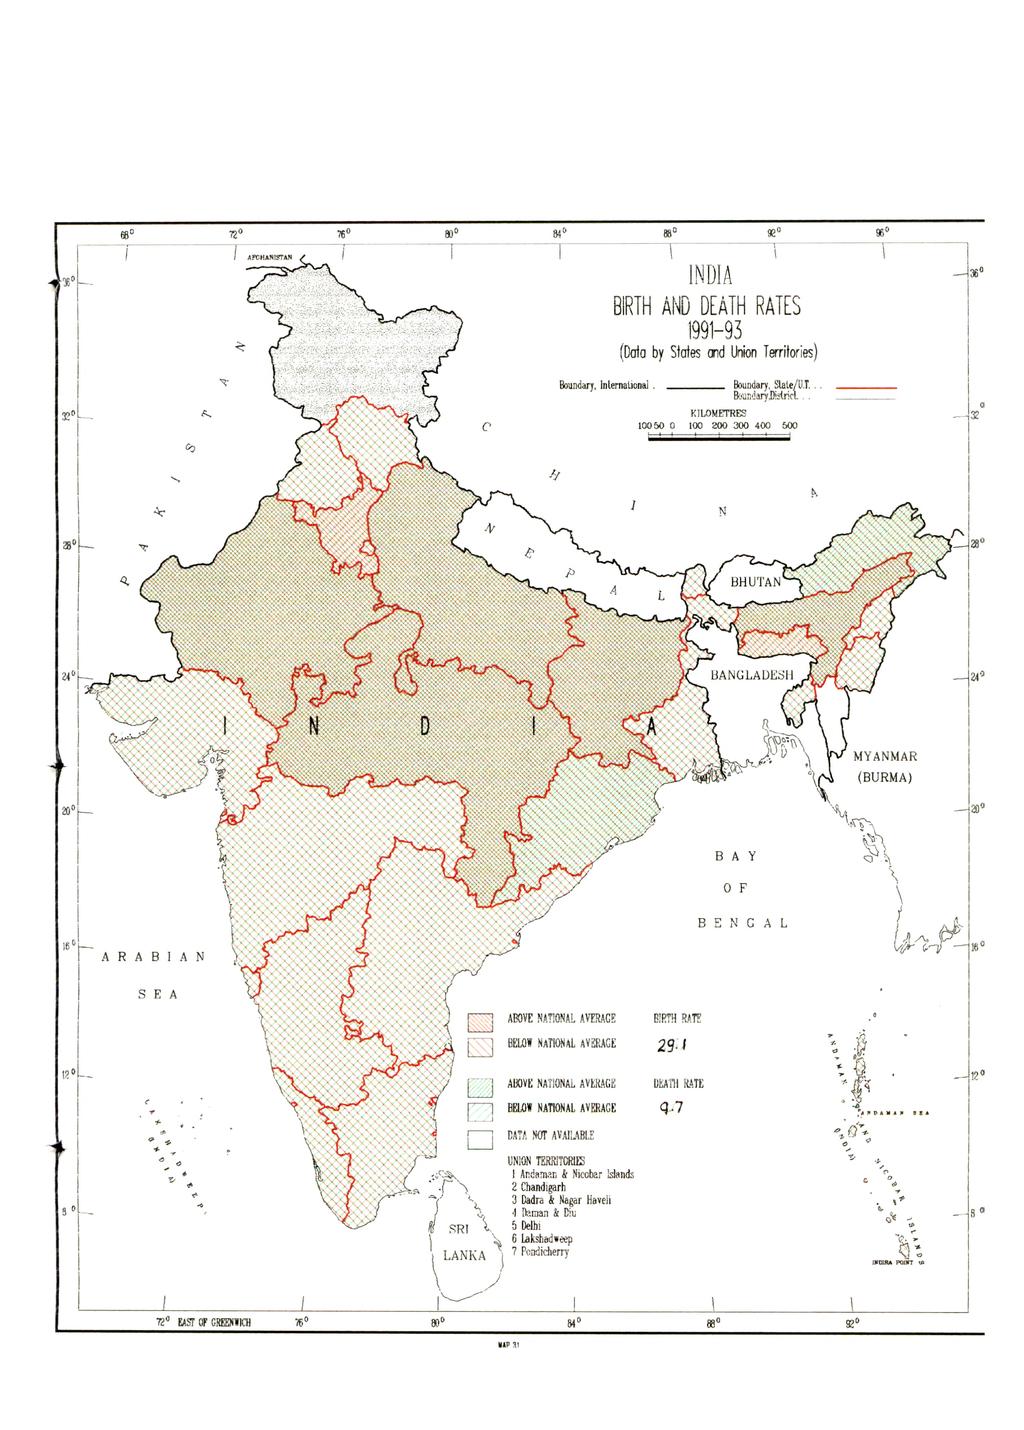 V.' 76' INDIA BIRTH AND DEATH RATES 1991-93 (Data by States and Union Territories) Bounoary, international Boundary, Slate/ ITT, Bound ary District.